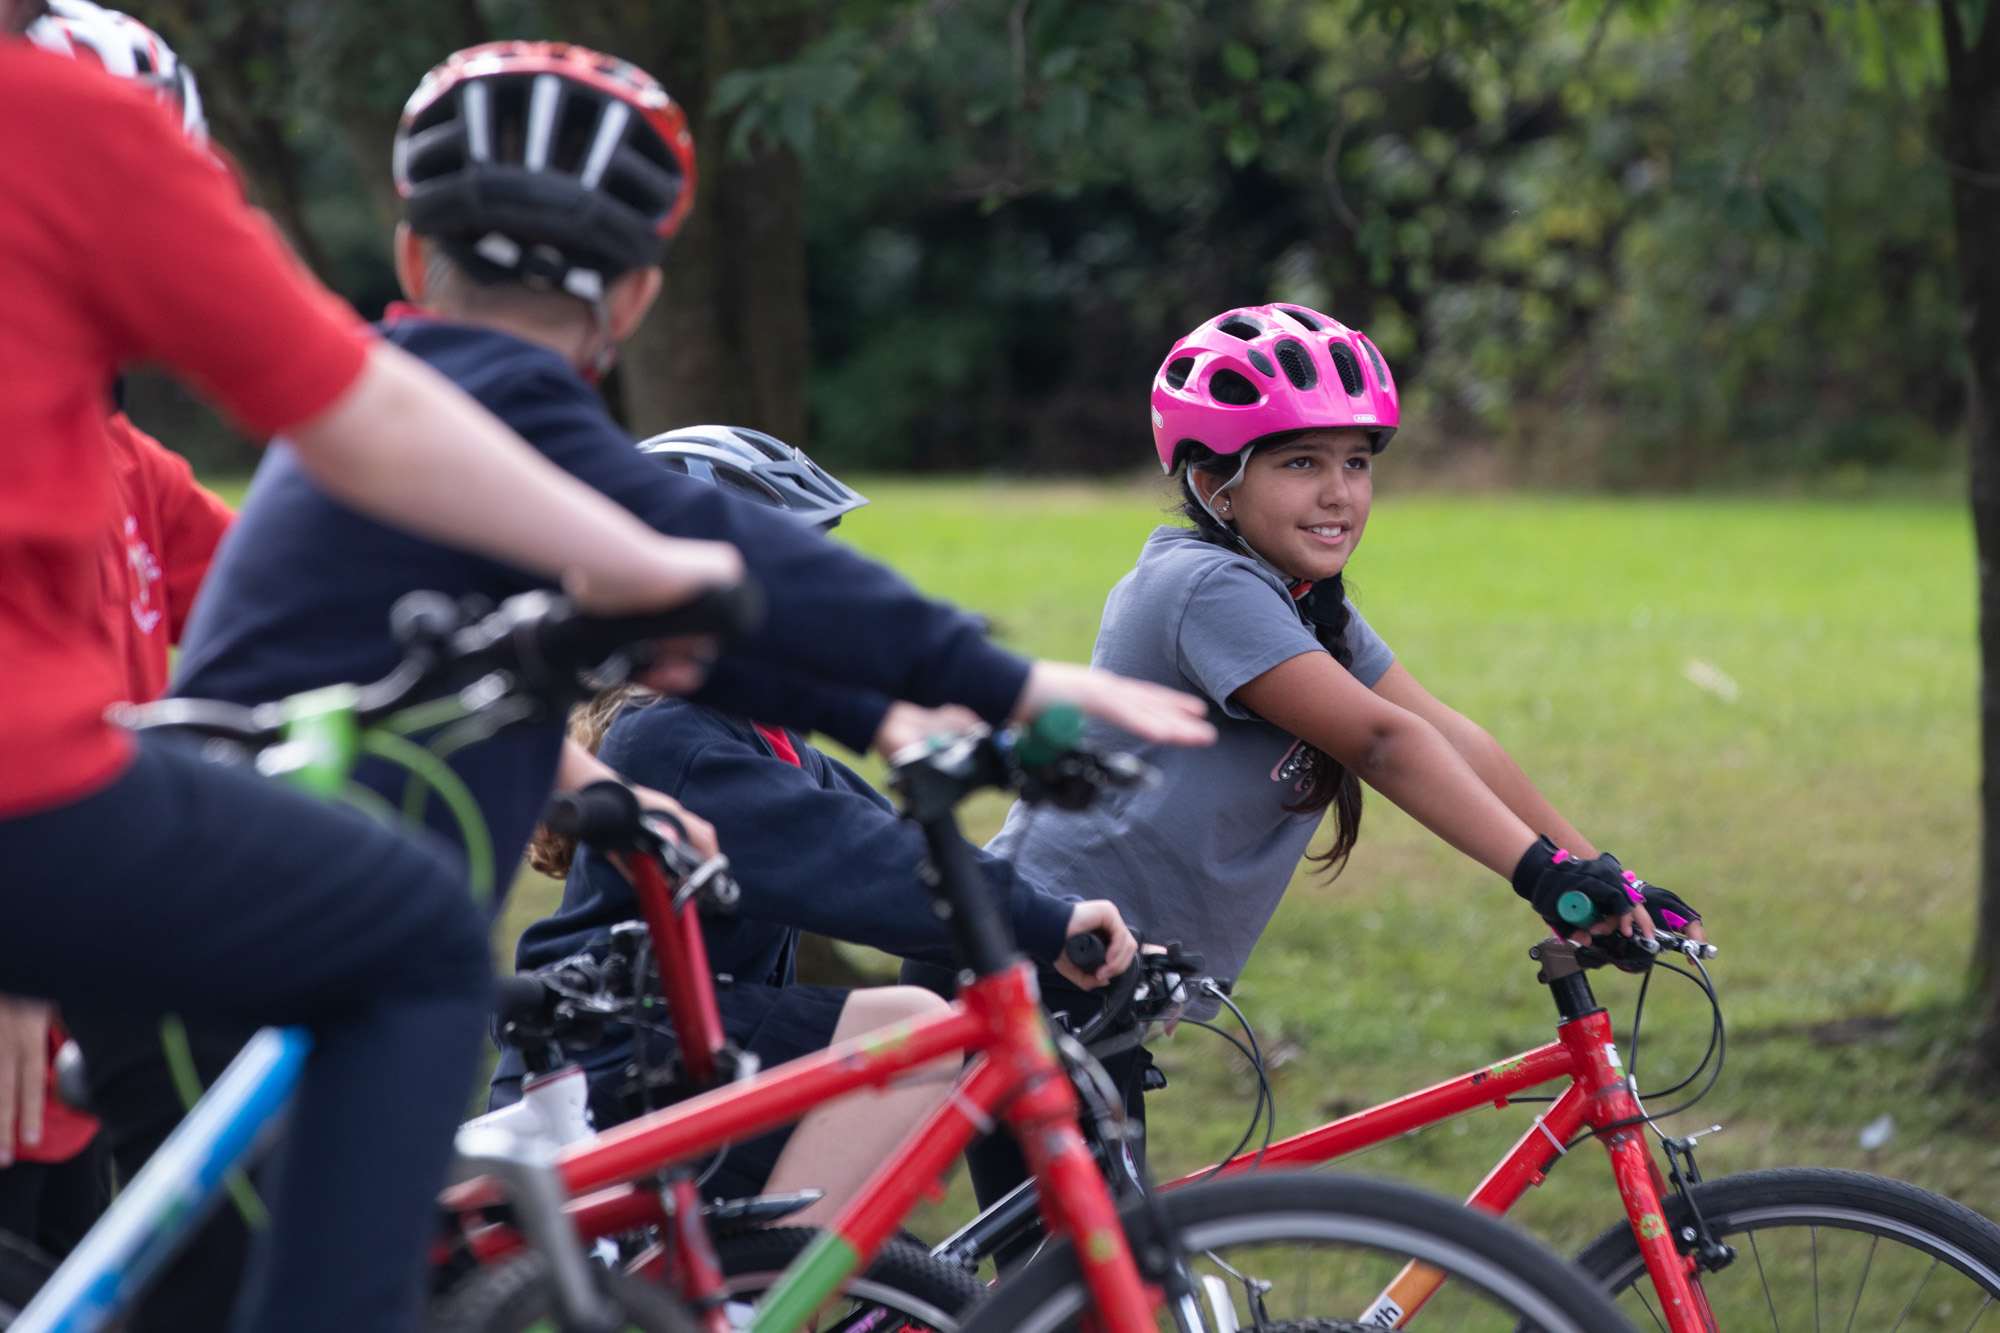 A young girl wearing a pink helment, grey t shirt and standing over a red bike smiles and looks up. In the foreground are other children on bikes looking away from the camera in blur.